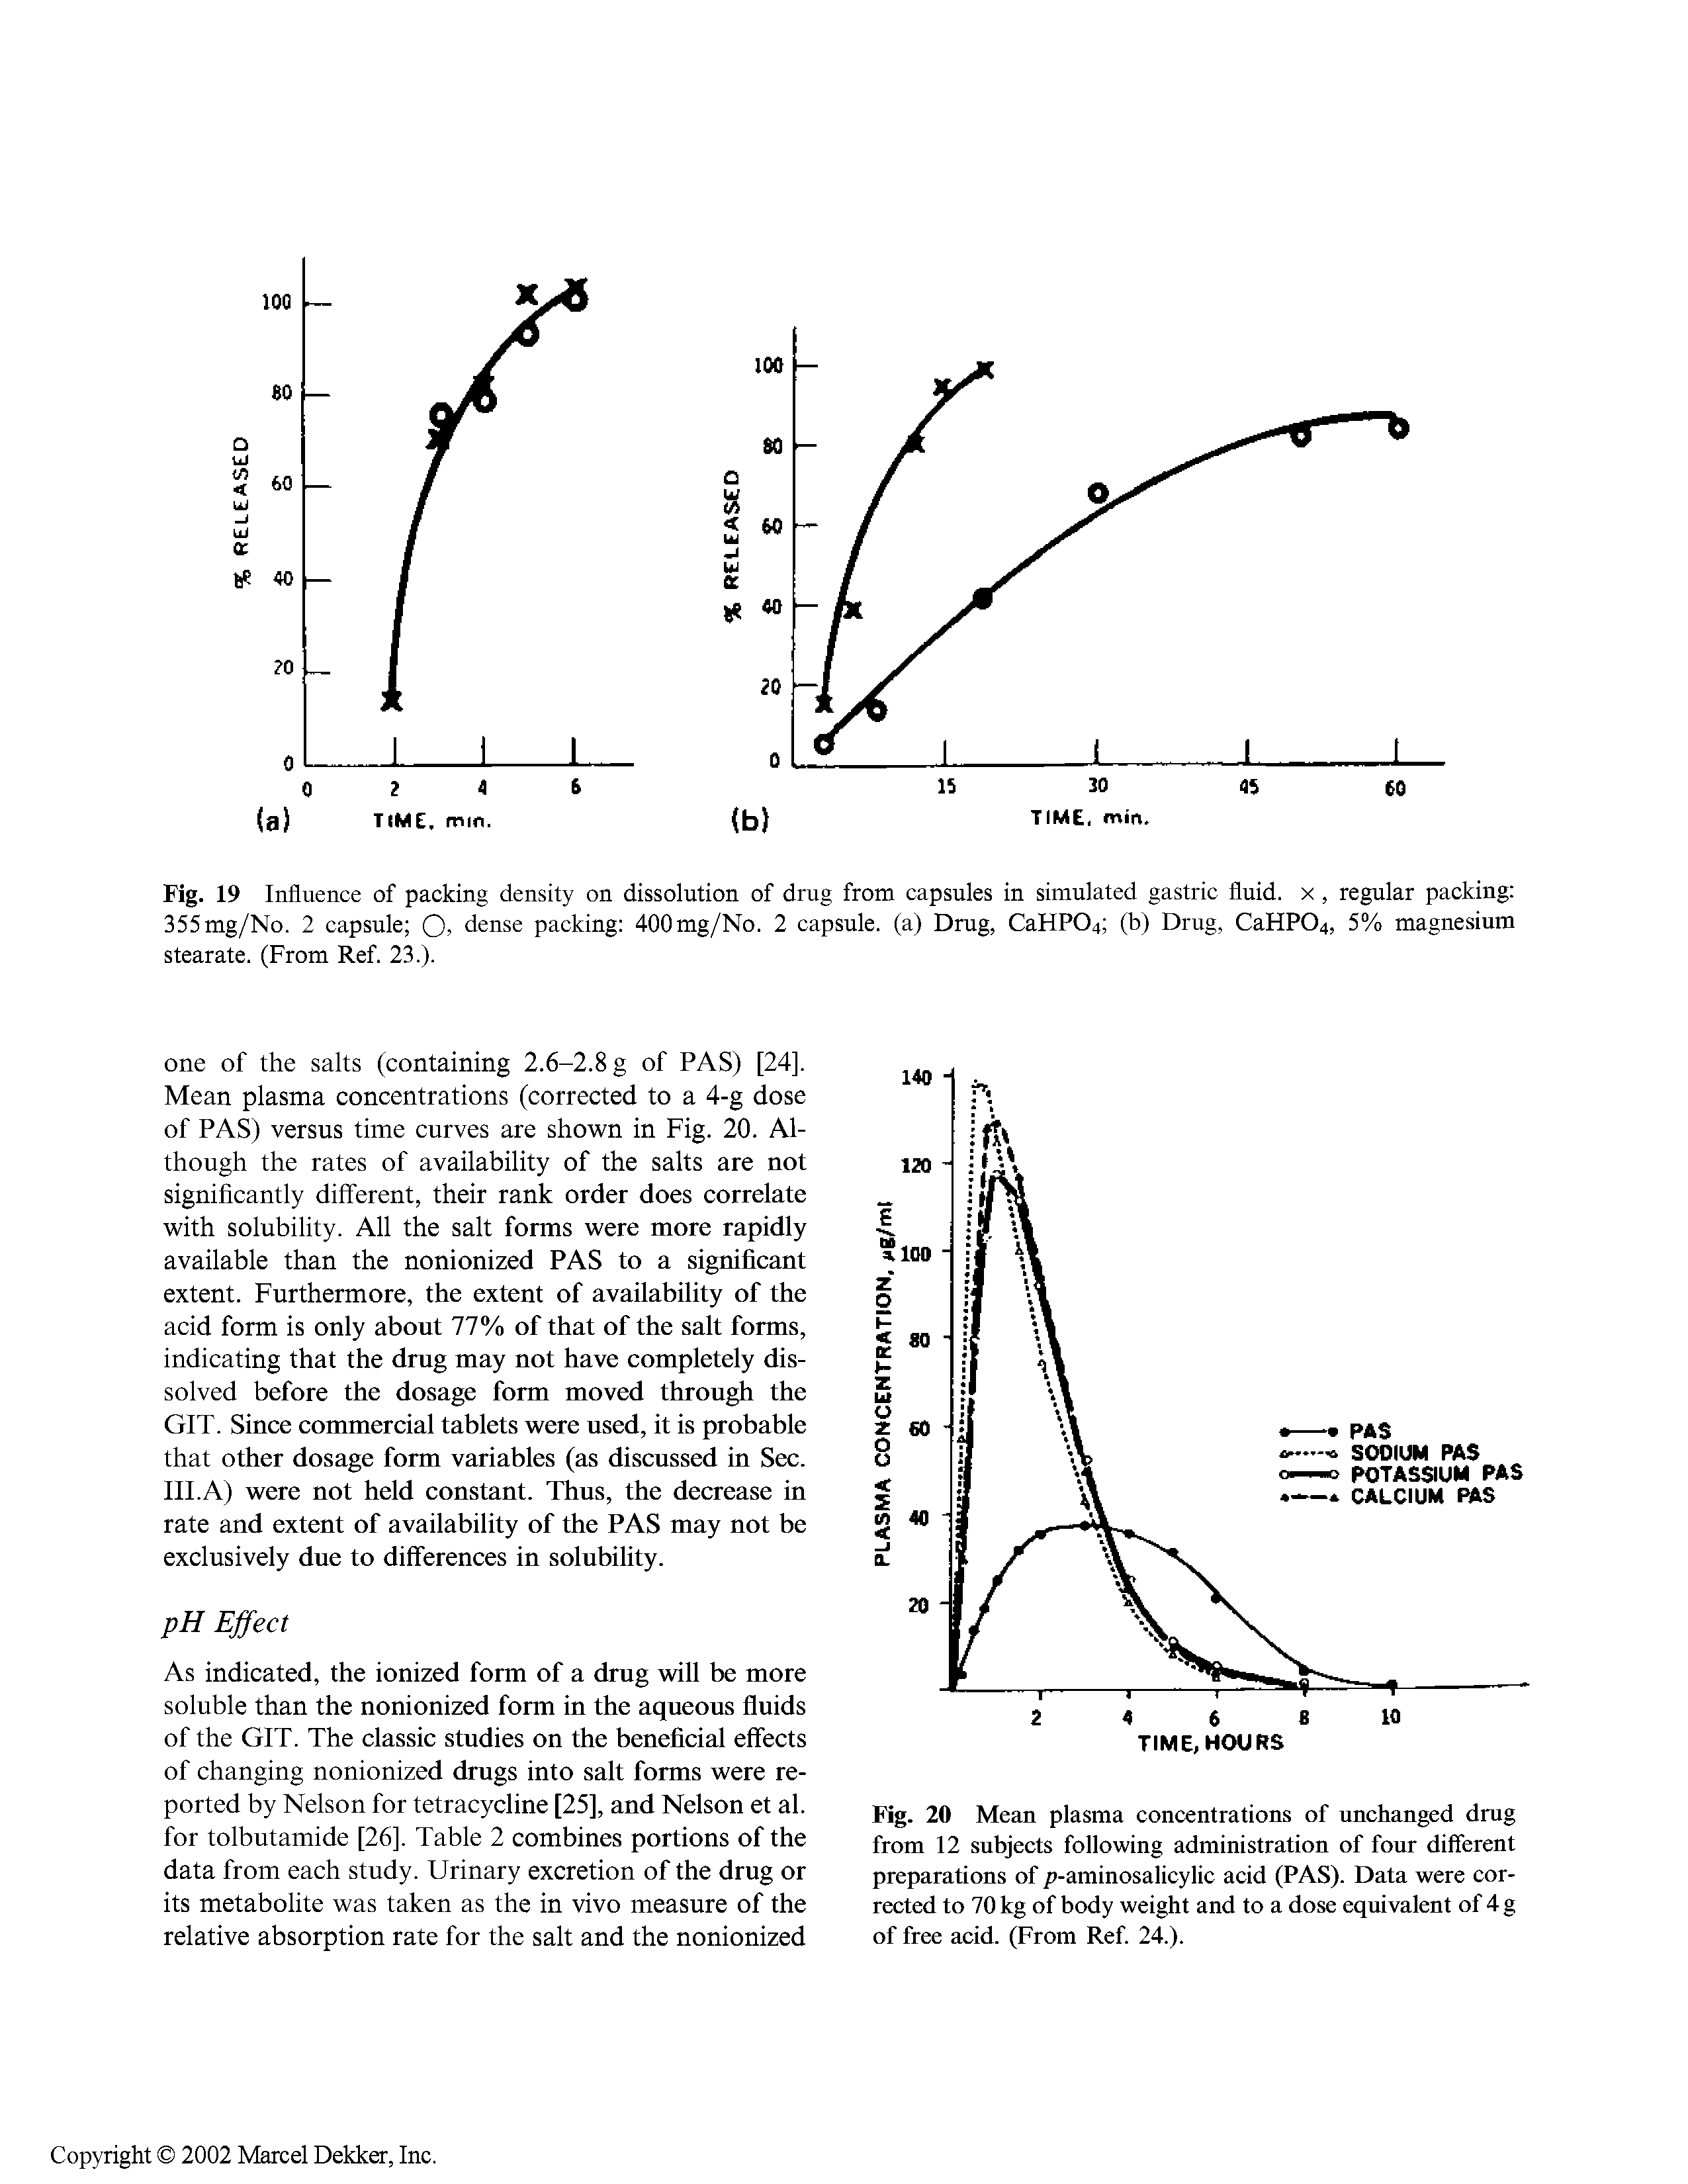 Fig. 20 Mean plasma concentrations of unchanged drug from 12 subjects following administration of four different preparations of p-aminosalicylic acid (PAS). Data were corrected to 70 kg of body weight and to a dose equivalent of 4 g of free acid. (From Ref. 24.).